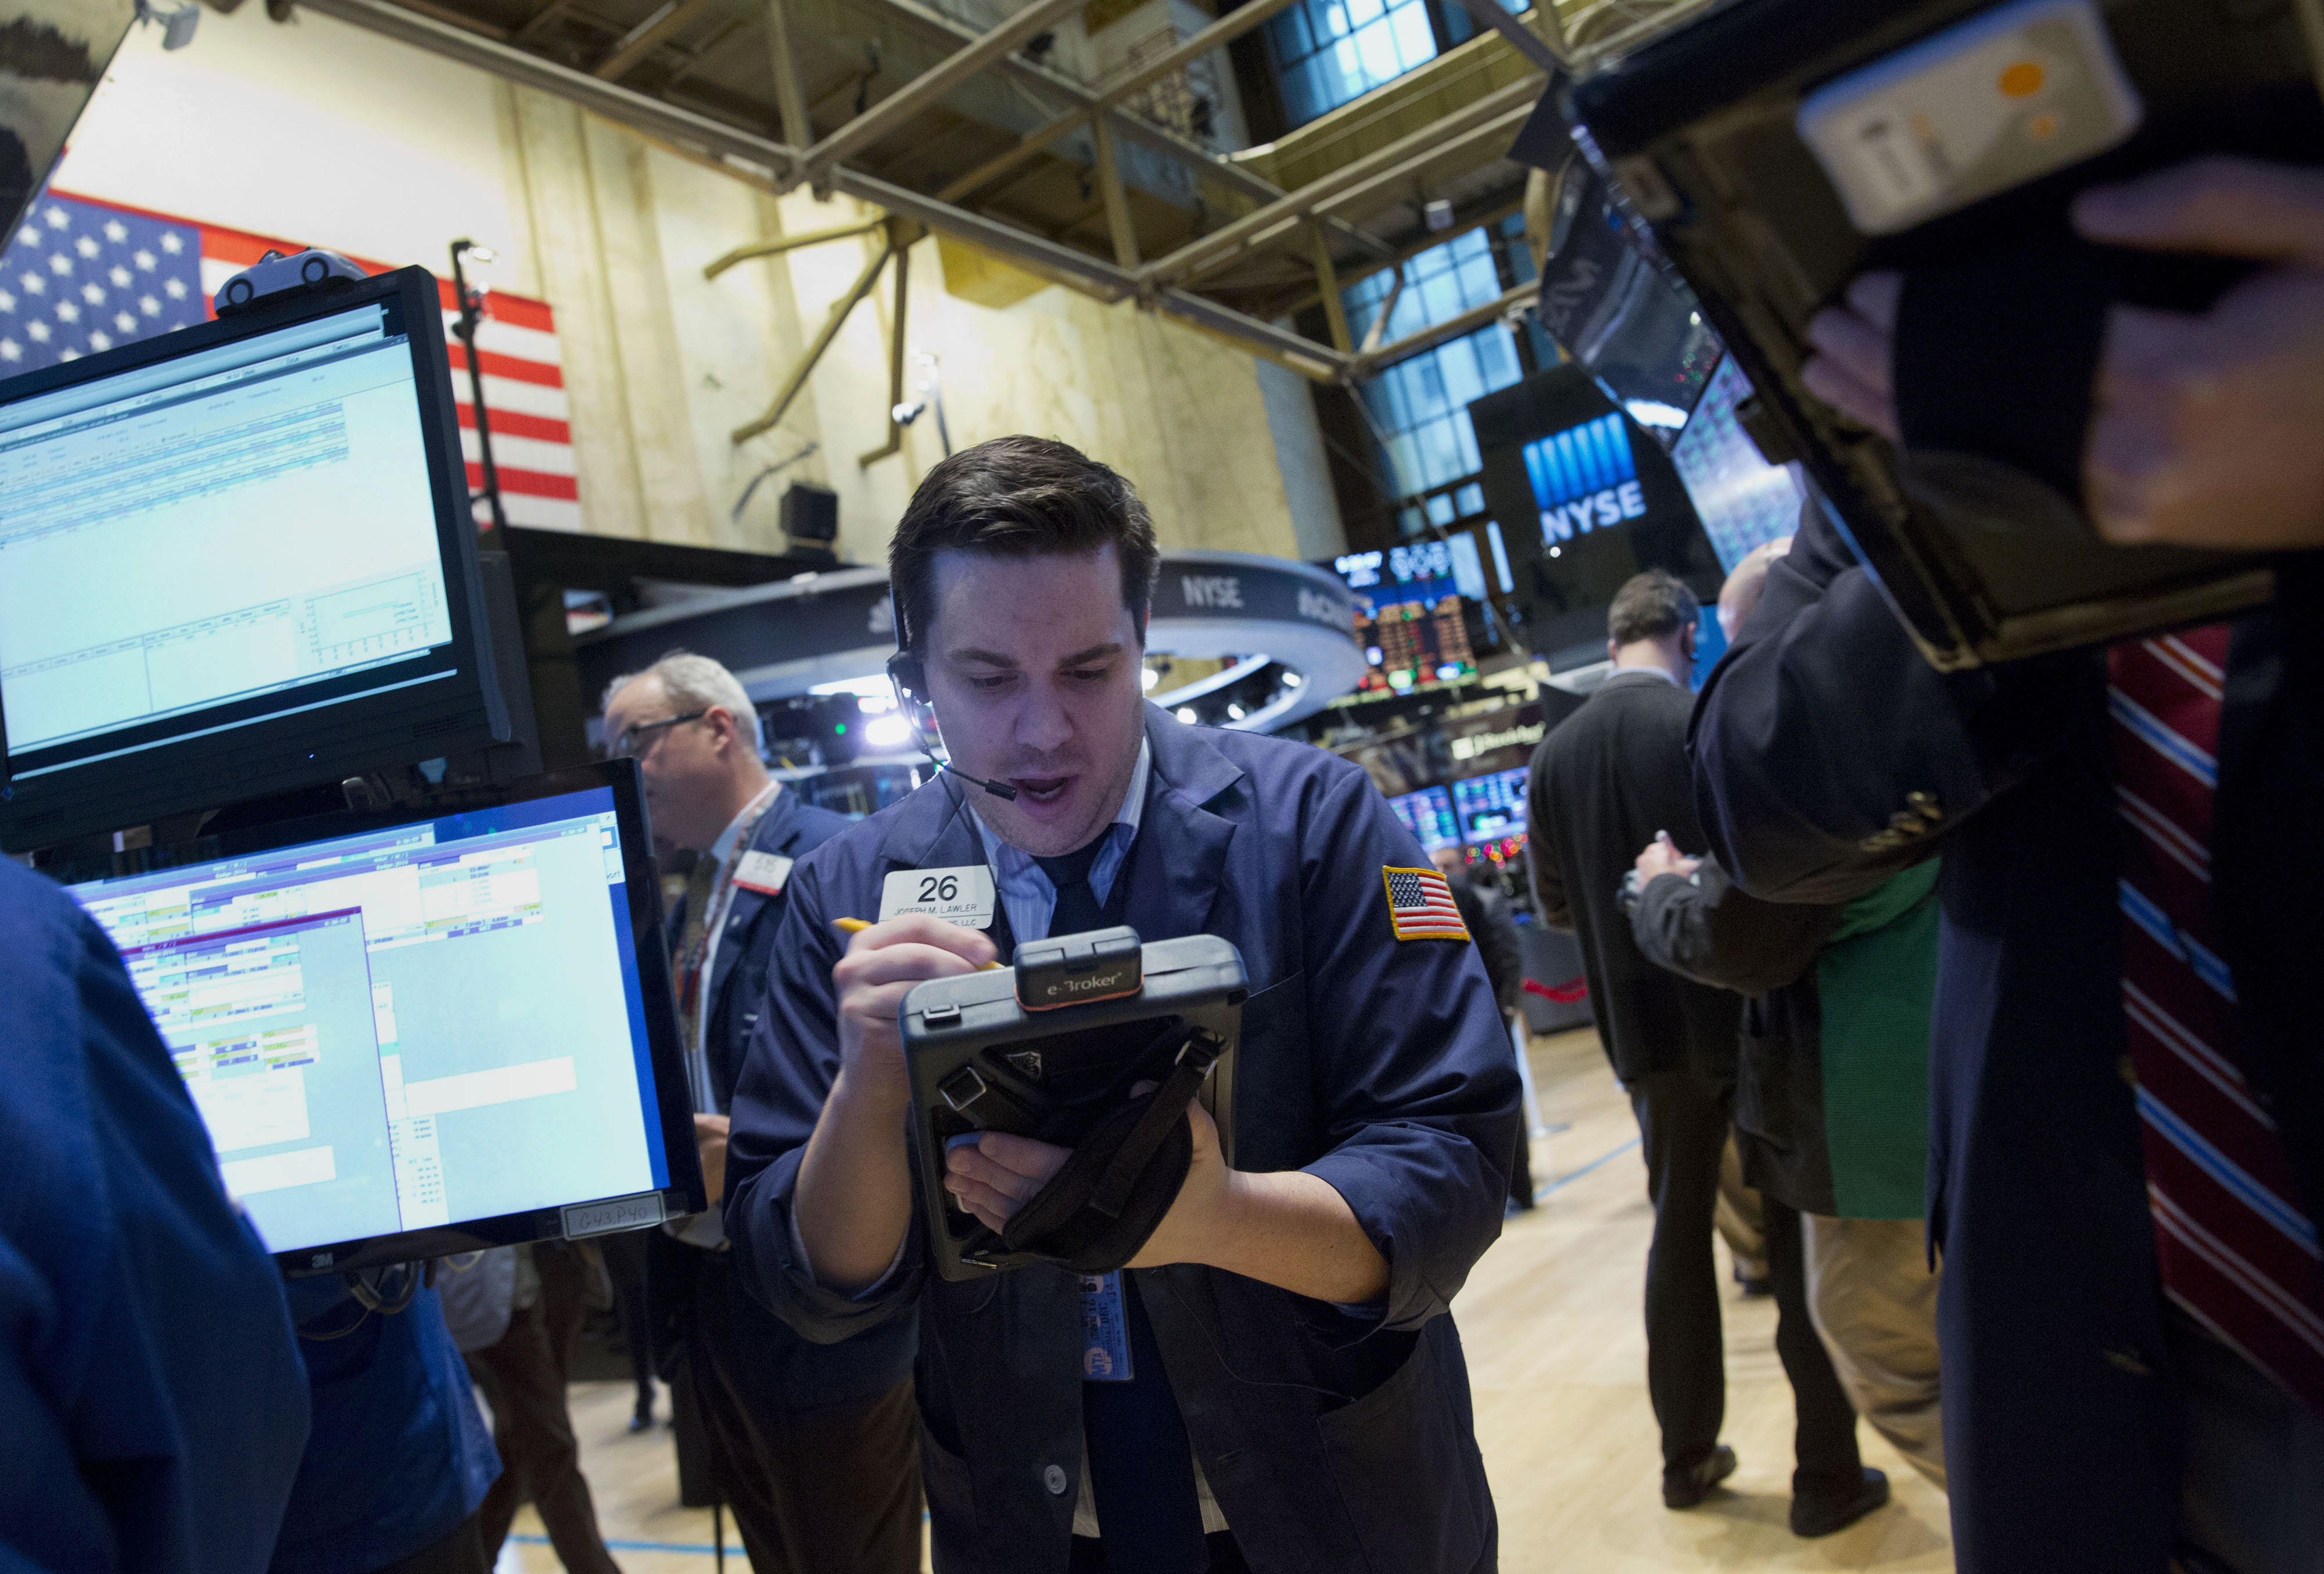 First Day Of Trading for 2015 On The Floor Of The NYSE As U.S. Stock-Index Futures Rise After S&P 500's December Decline